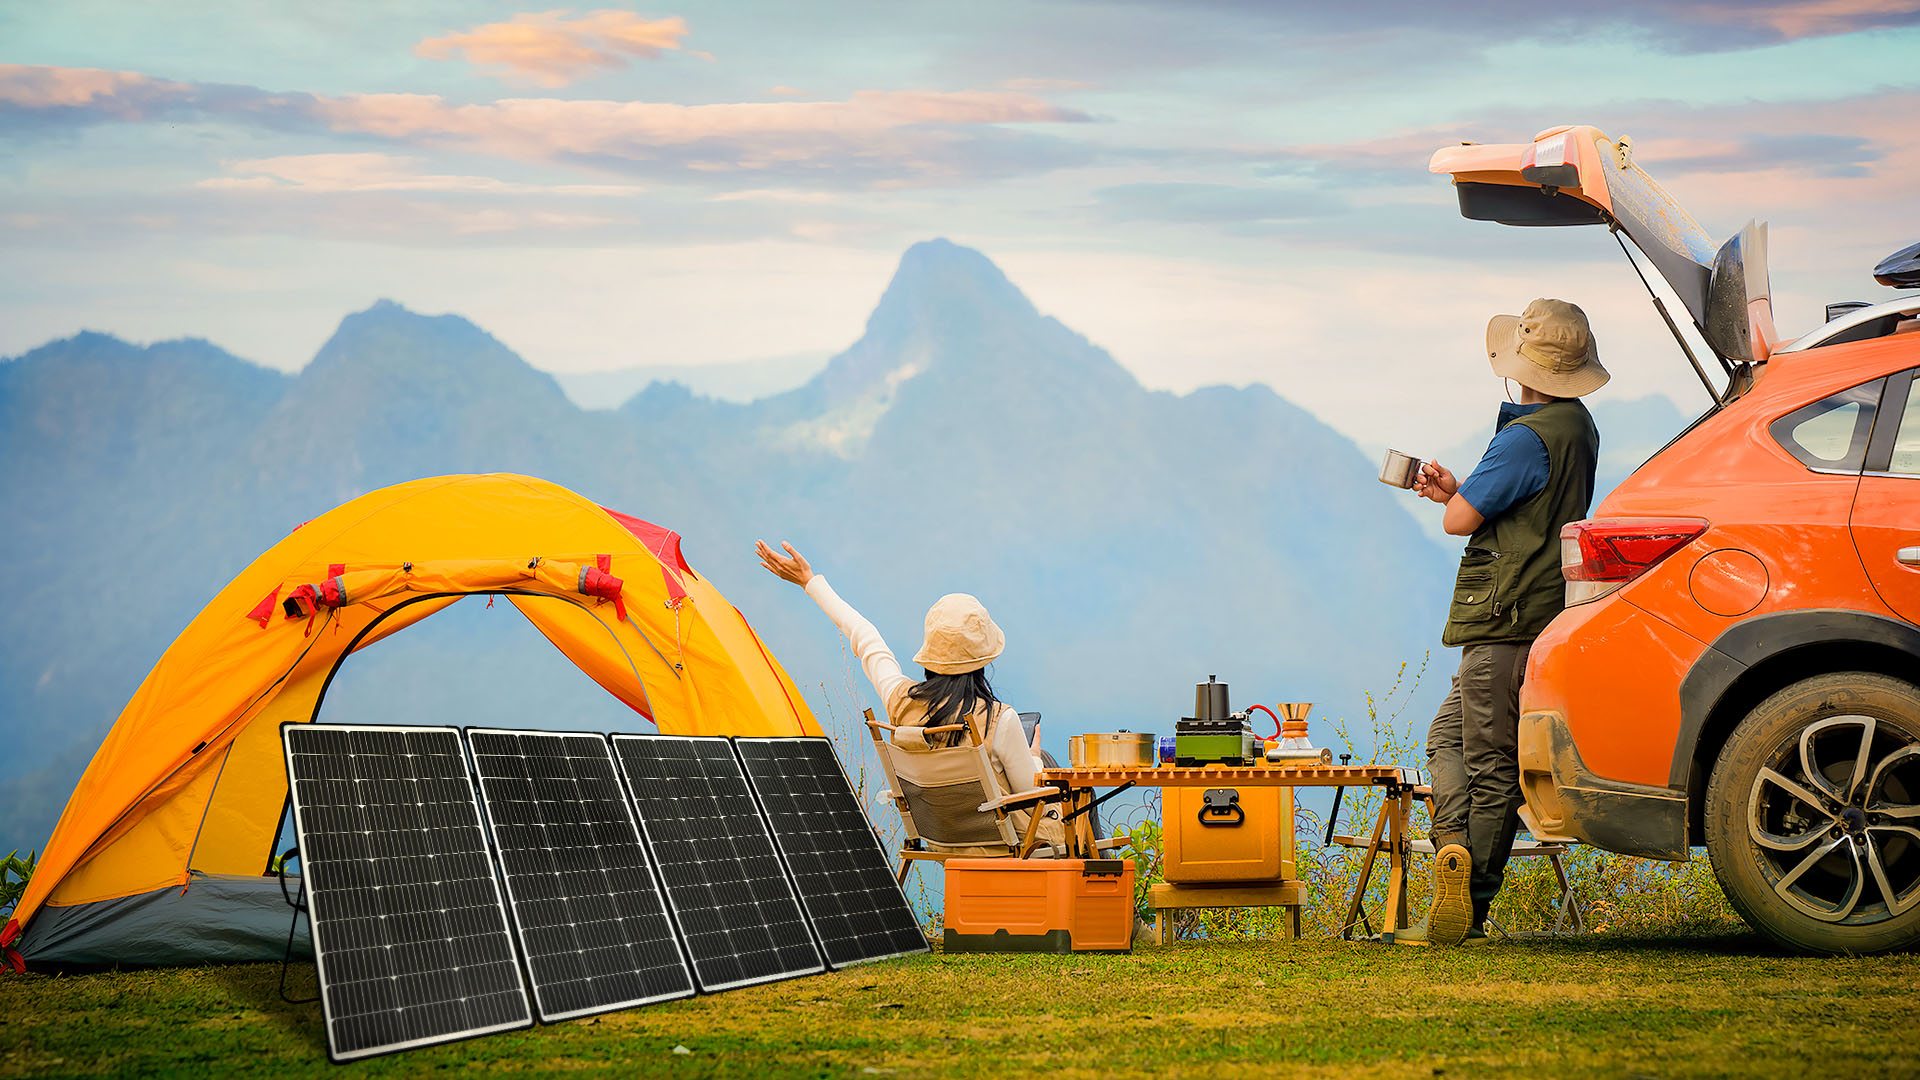 Sungold Solar Portable Folding Solar Panel Free Reliable Power Every Day